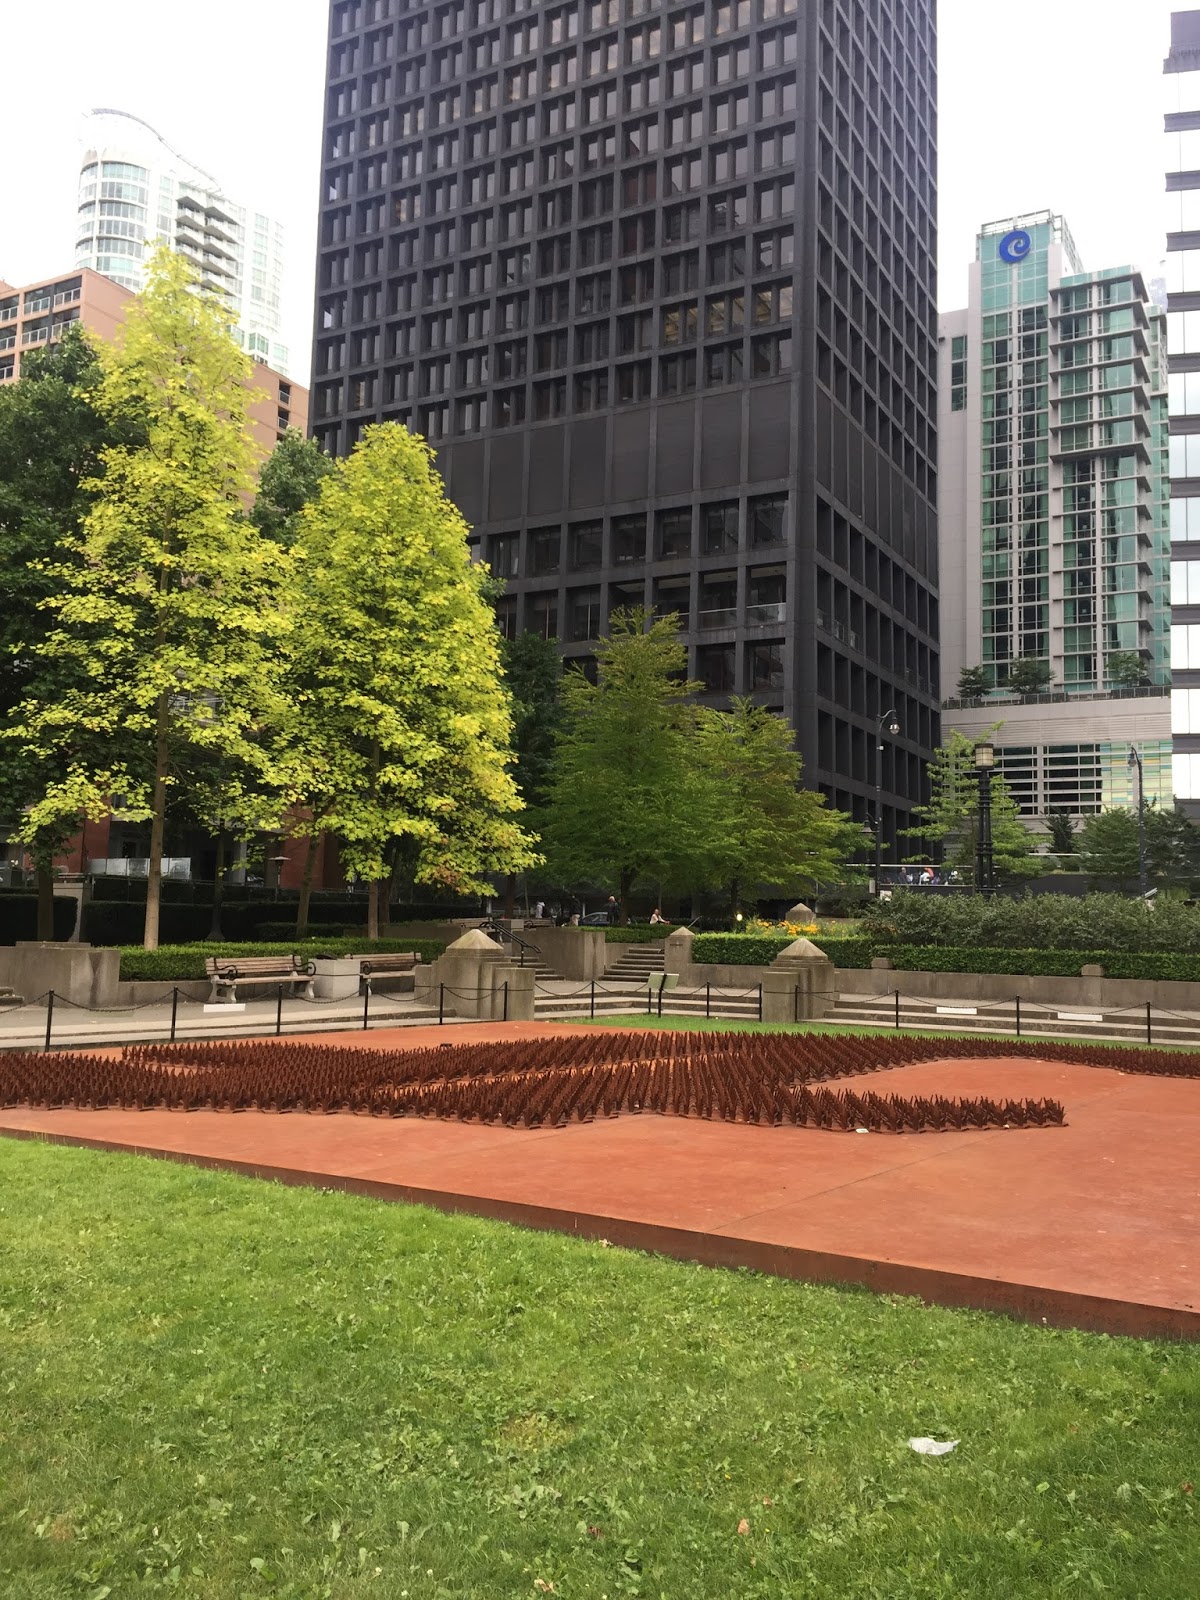 Sunday Morning Eye Candy — Public Art in Vancouver, Two Works